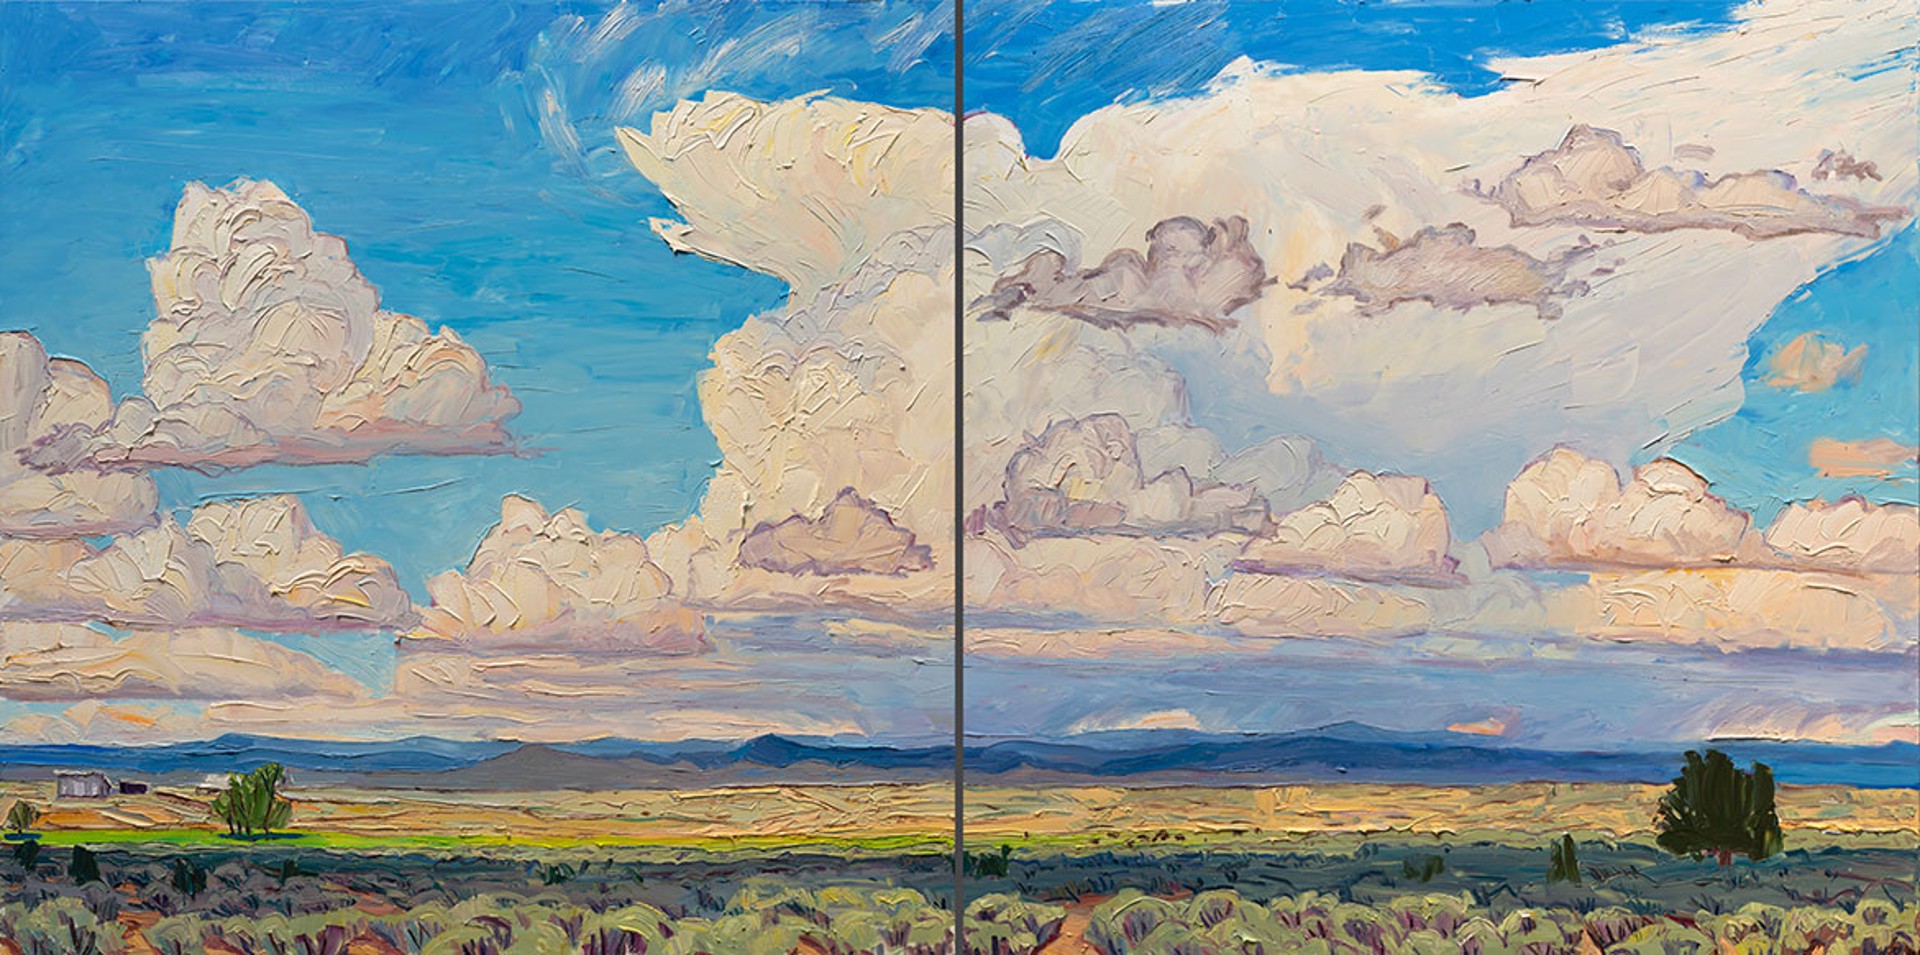 West from 150 at Noon (diptych) by Jivan Lee